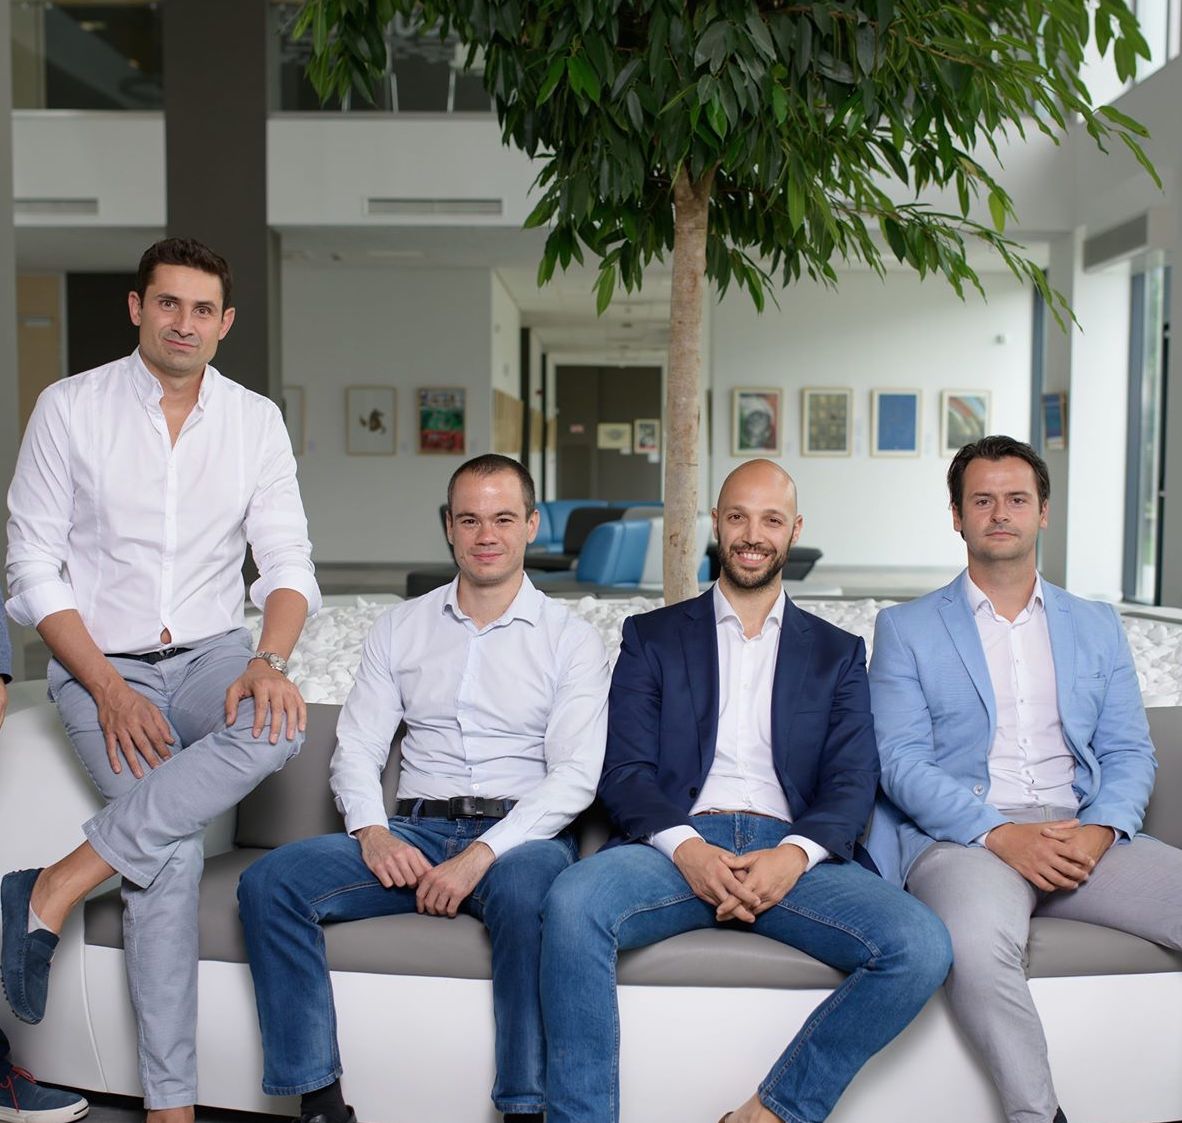 Could Colibra's team break the vicious circle in insurance industry? ©Colibra